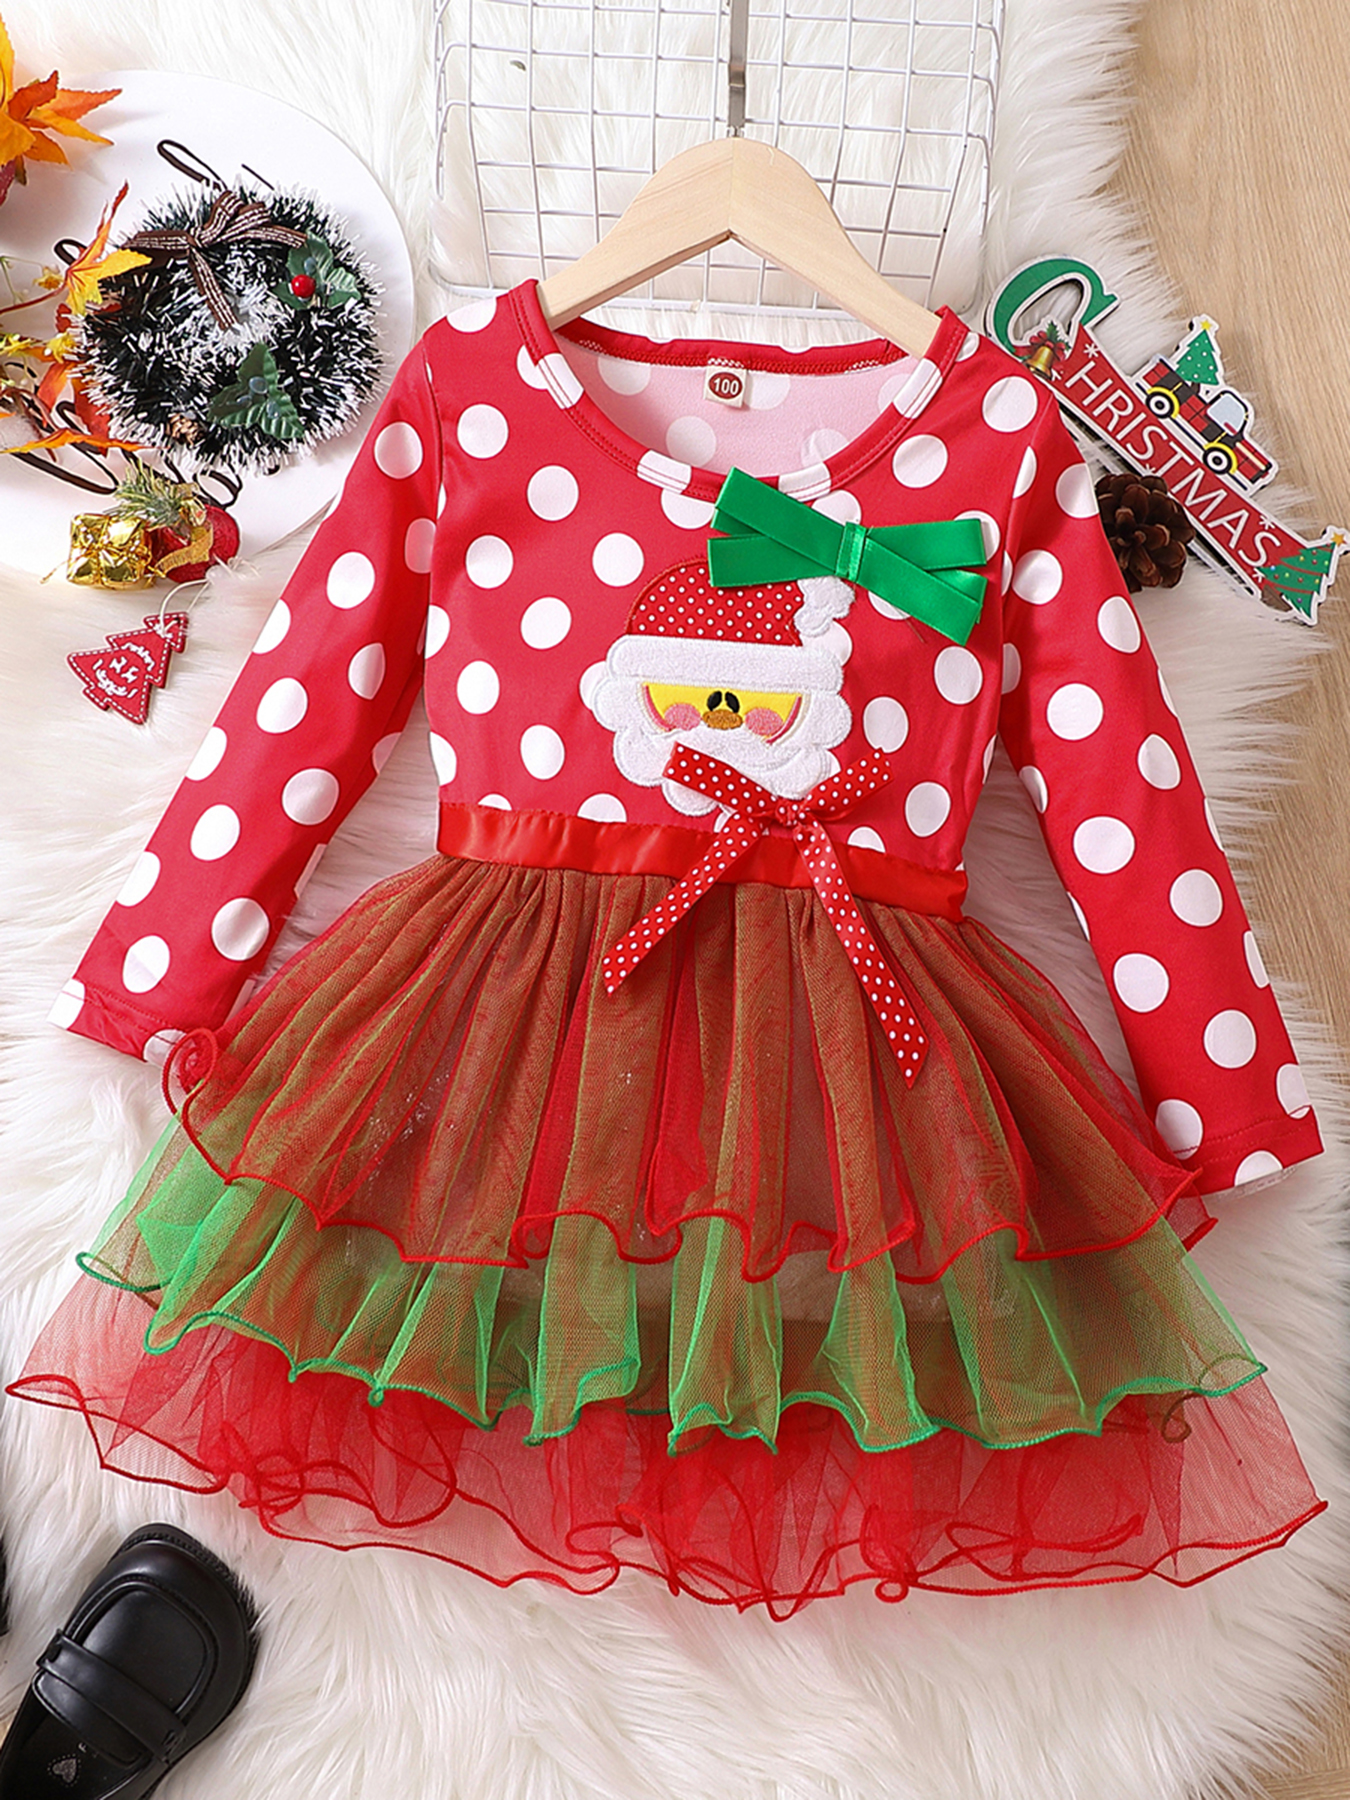 Little Toddler Baby Girl Christmas Outfits Red Plaid Ruffle Sleeve Dress  Princess Lace Tutu Dresses Xmas Party Clothes 